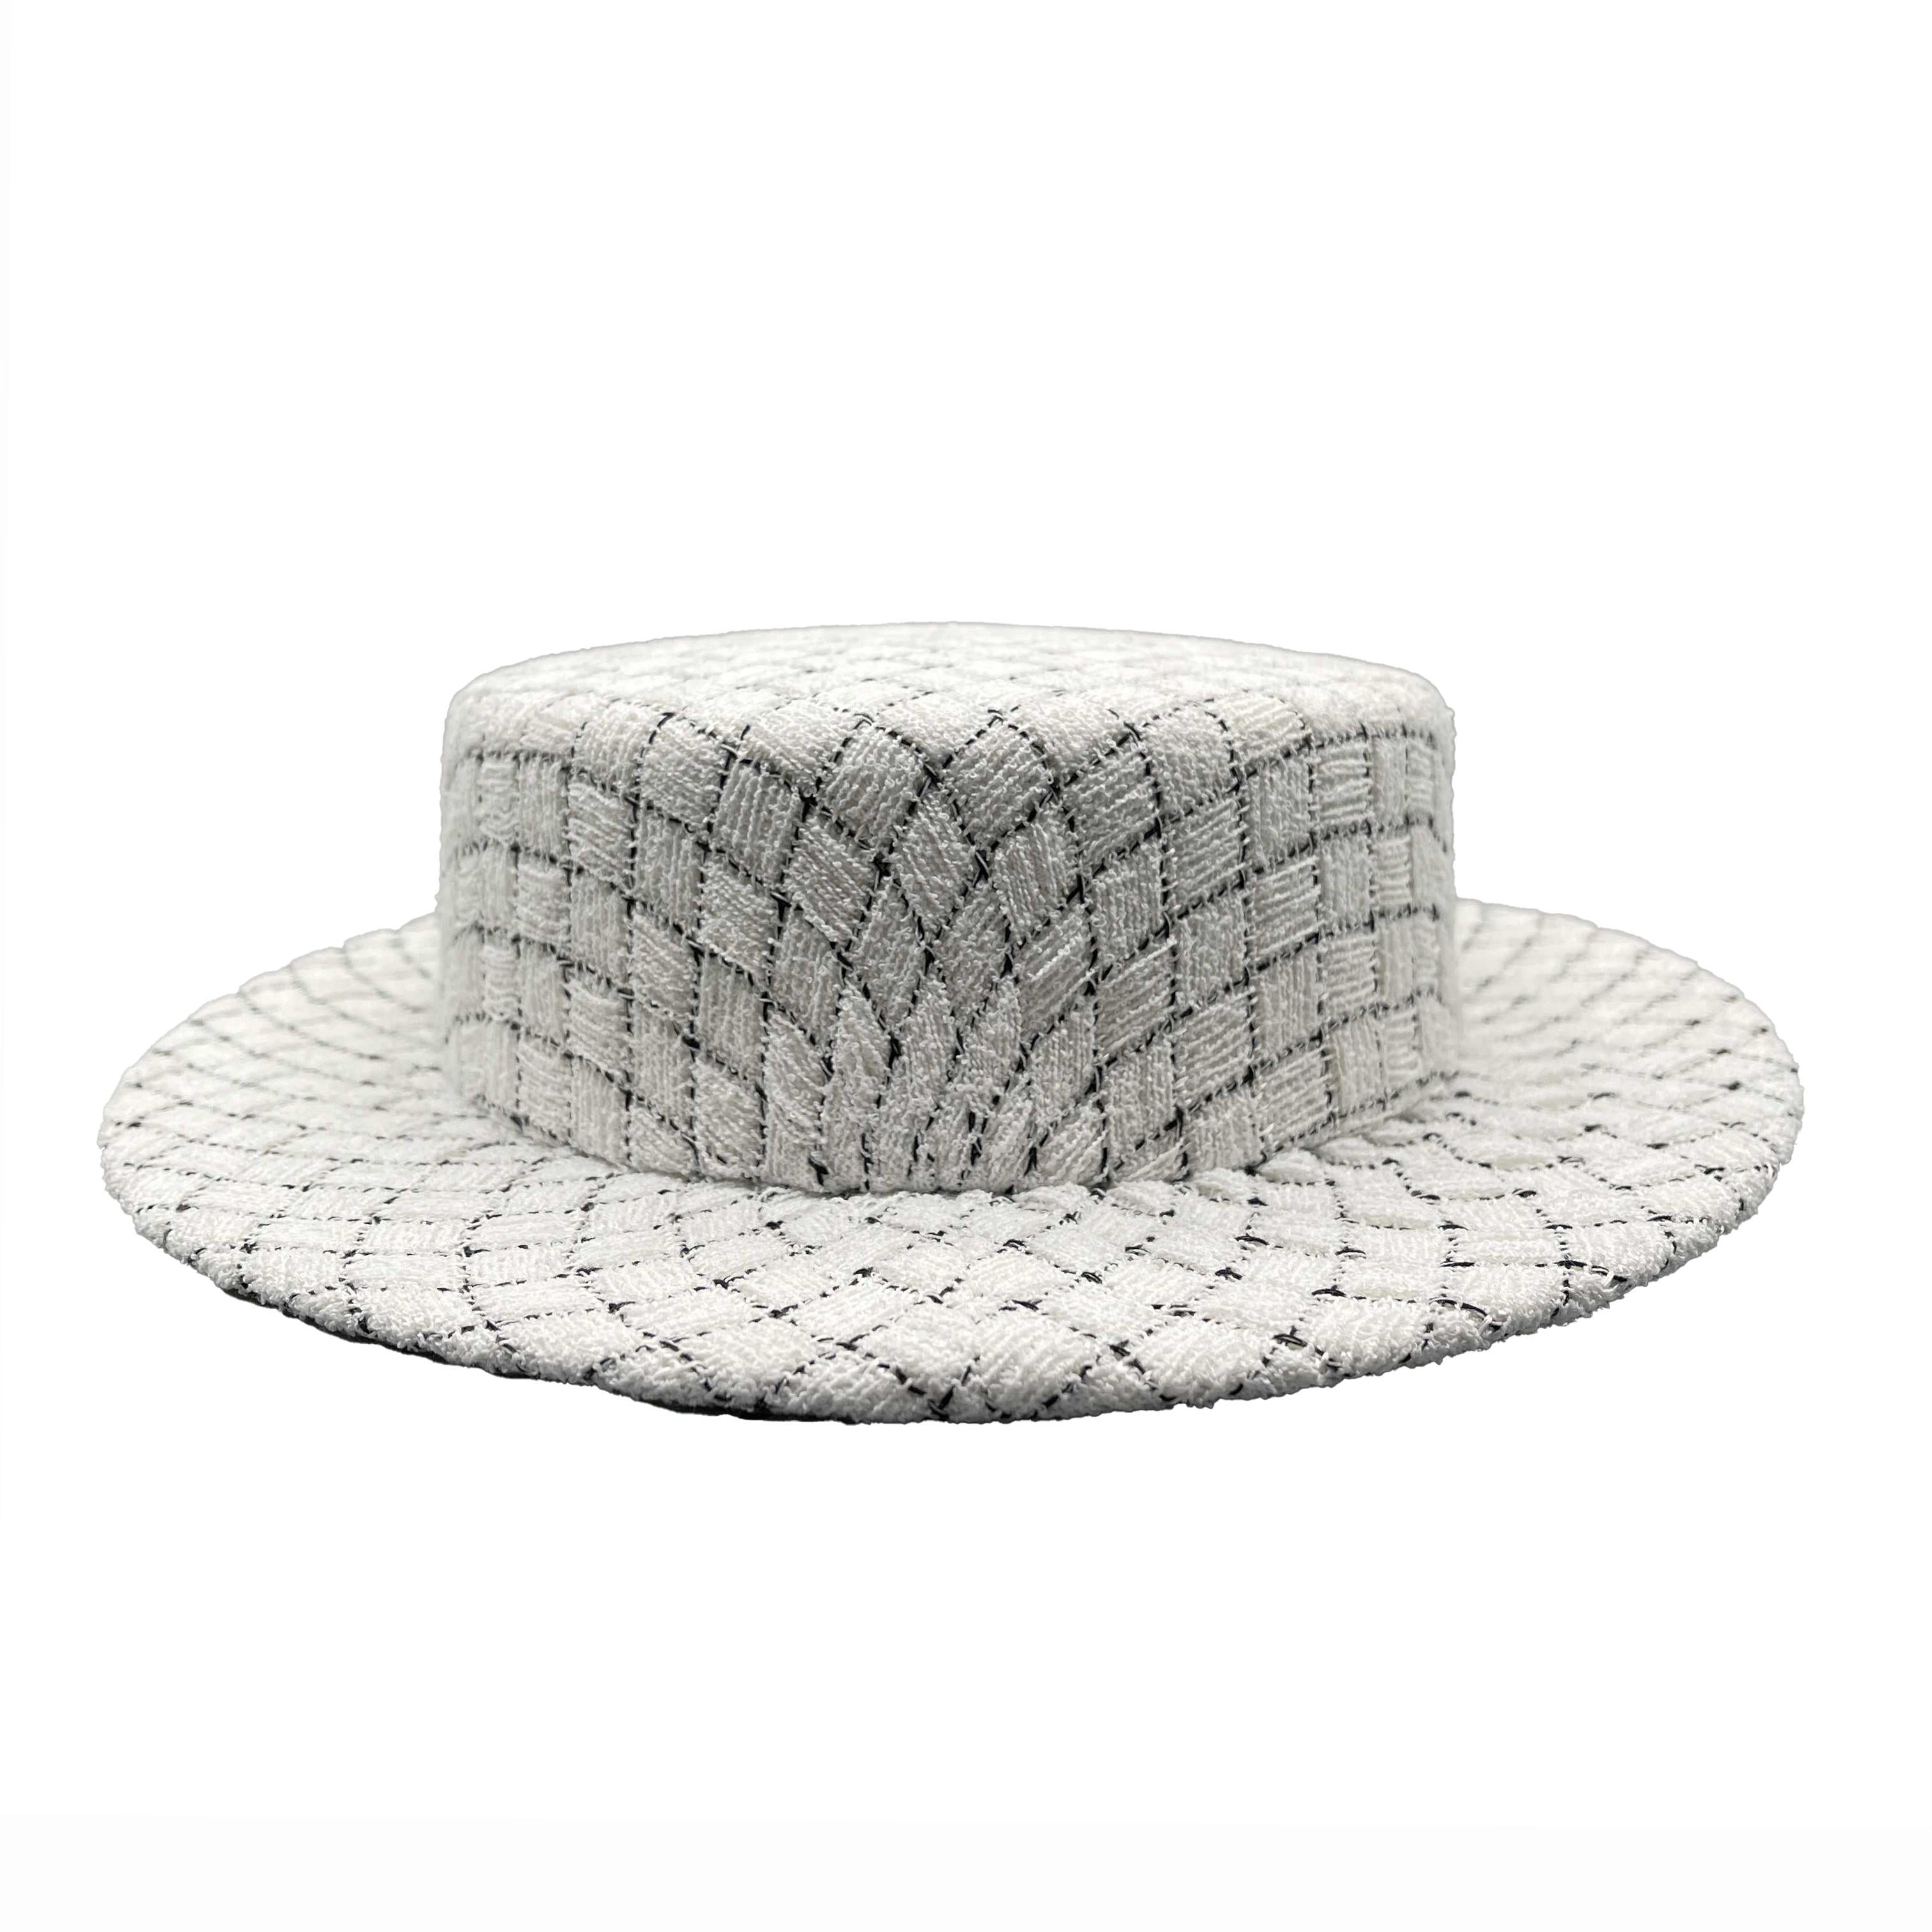 CHANEL - Pristine - Quilted Fantasy Tweed Boater - Black, White - Hat

Description

This Chanel boater hat is crafted with a polyester and silk fabric blend, contains a tweed white and black quilted design, and features a clear resin CC logo